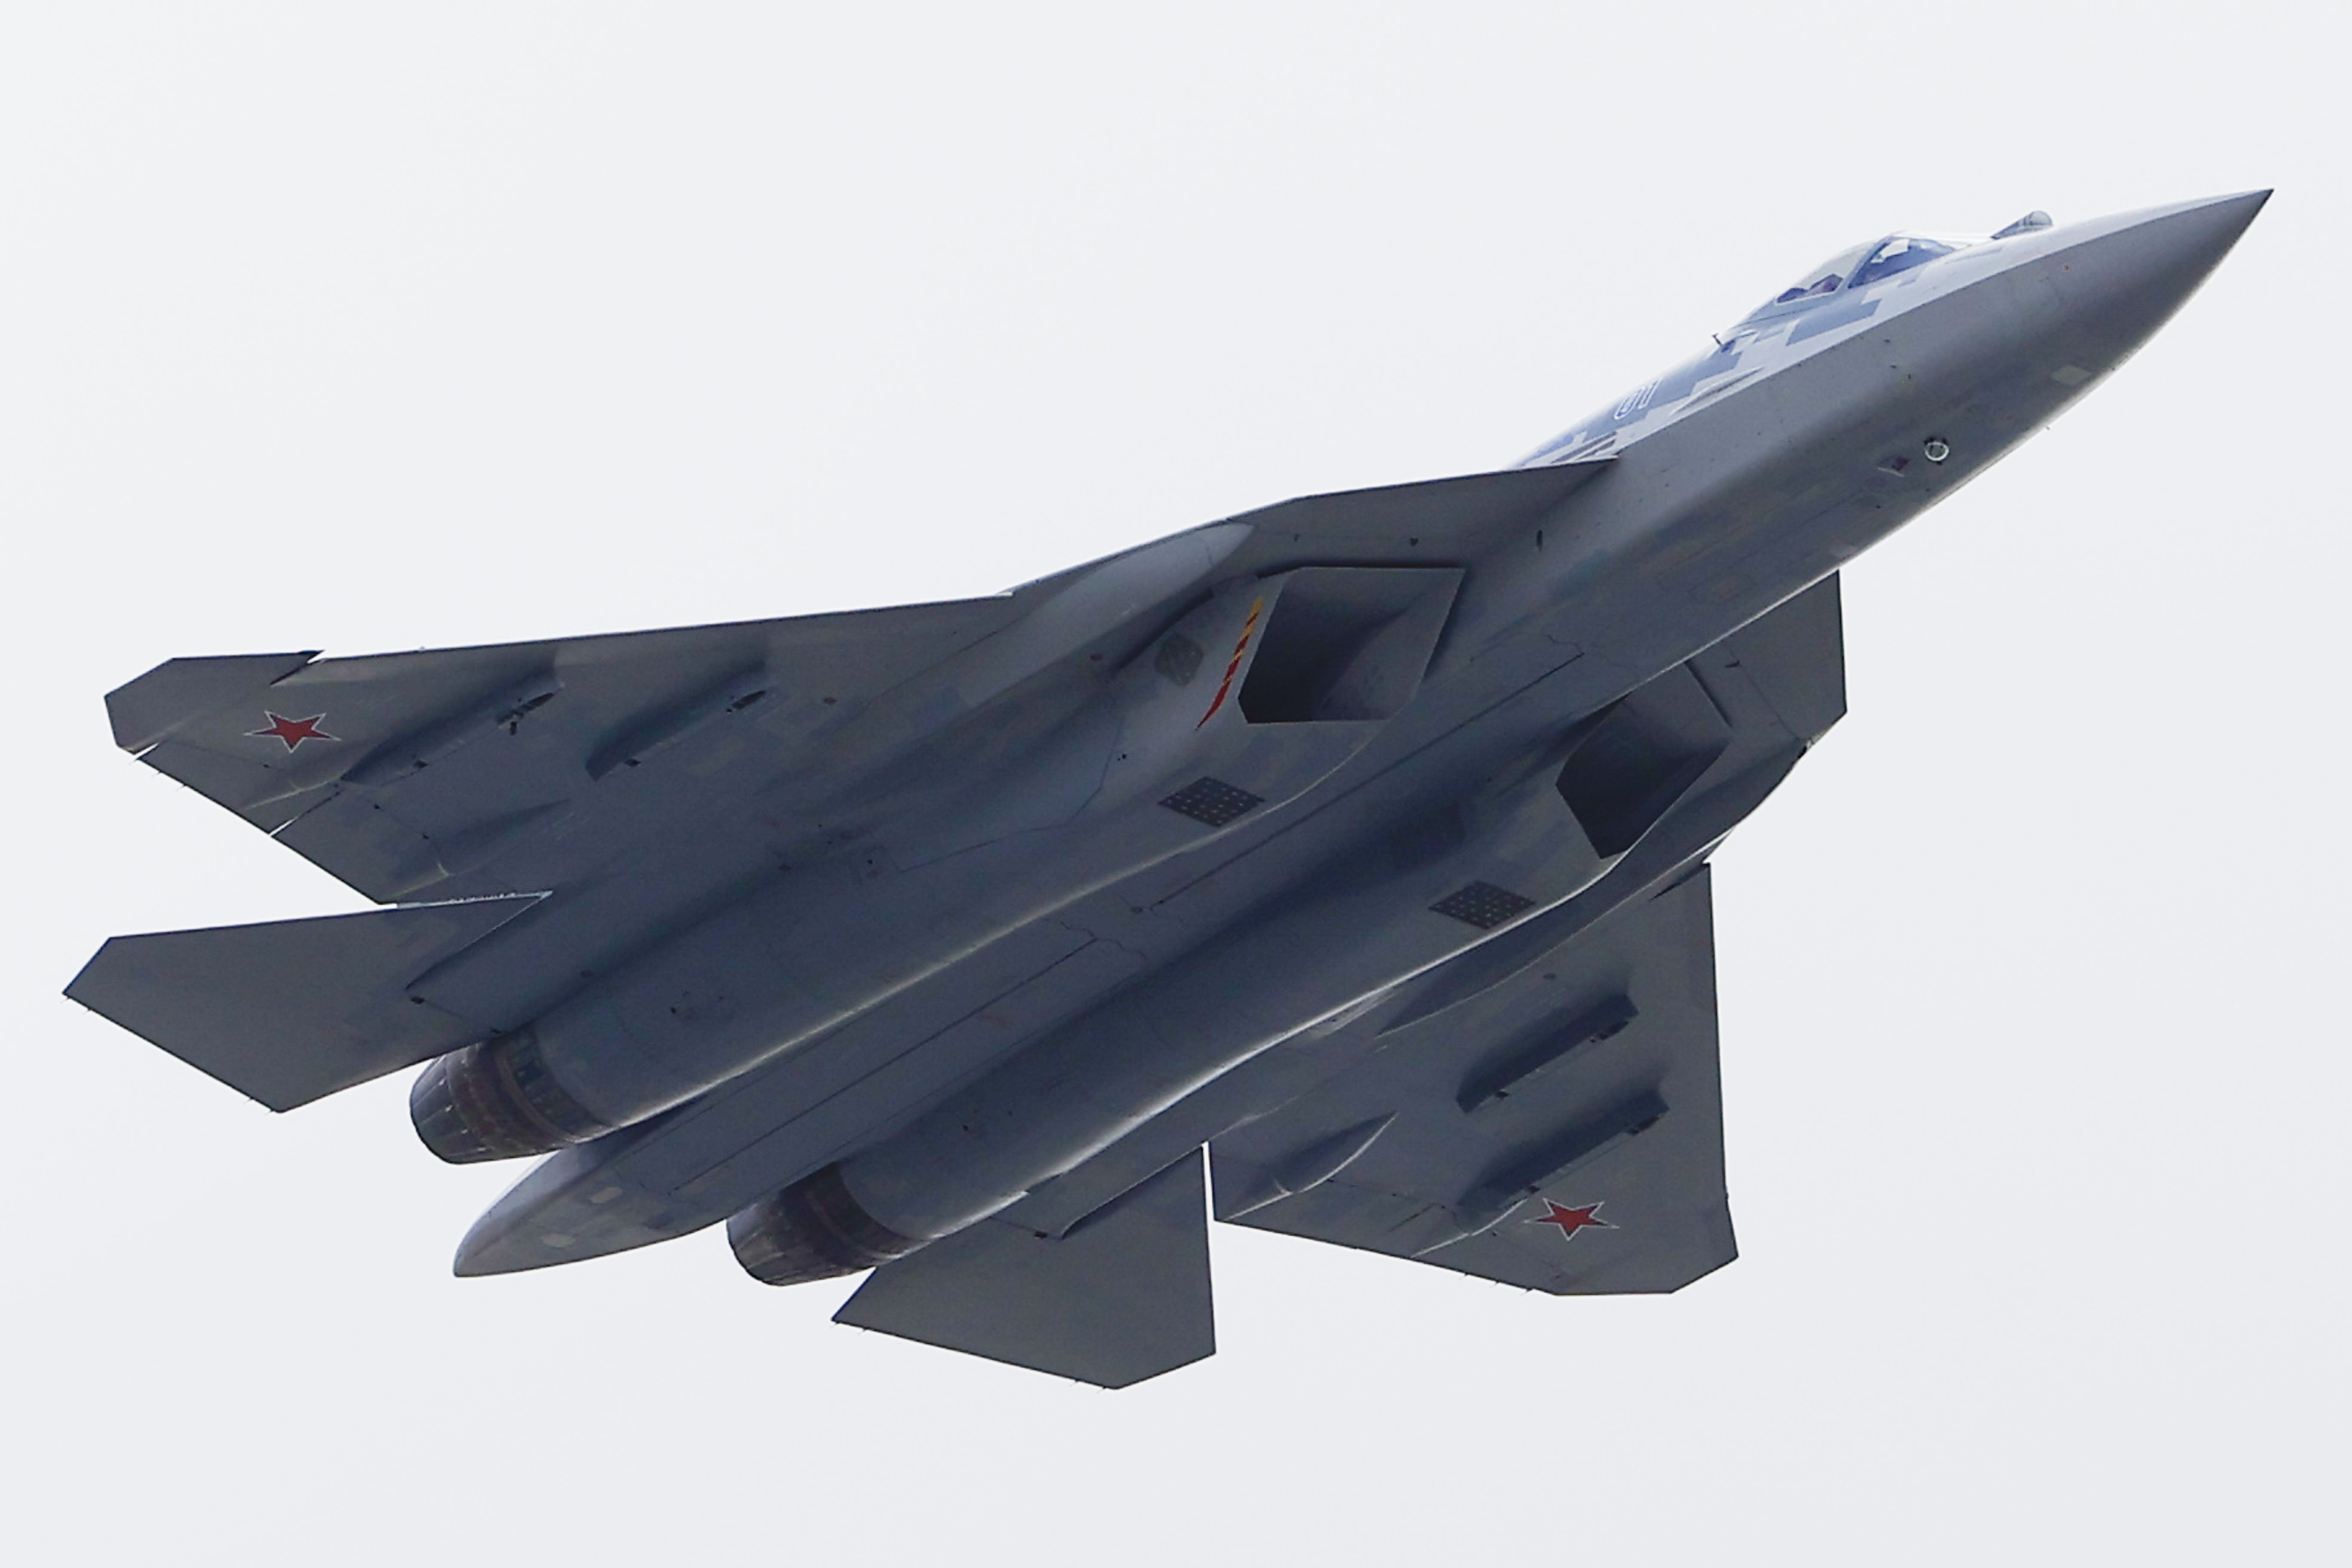 Russia New Fighter Jet: Single-Engine Stealth Fighter Details